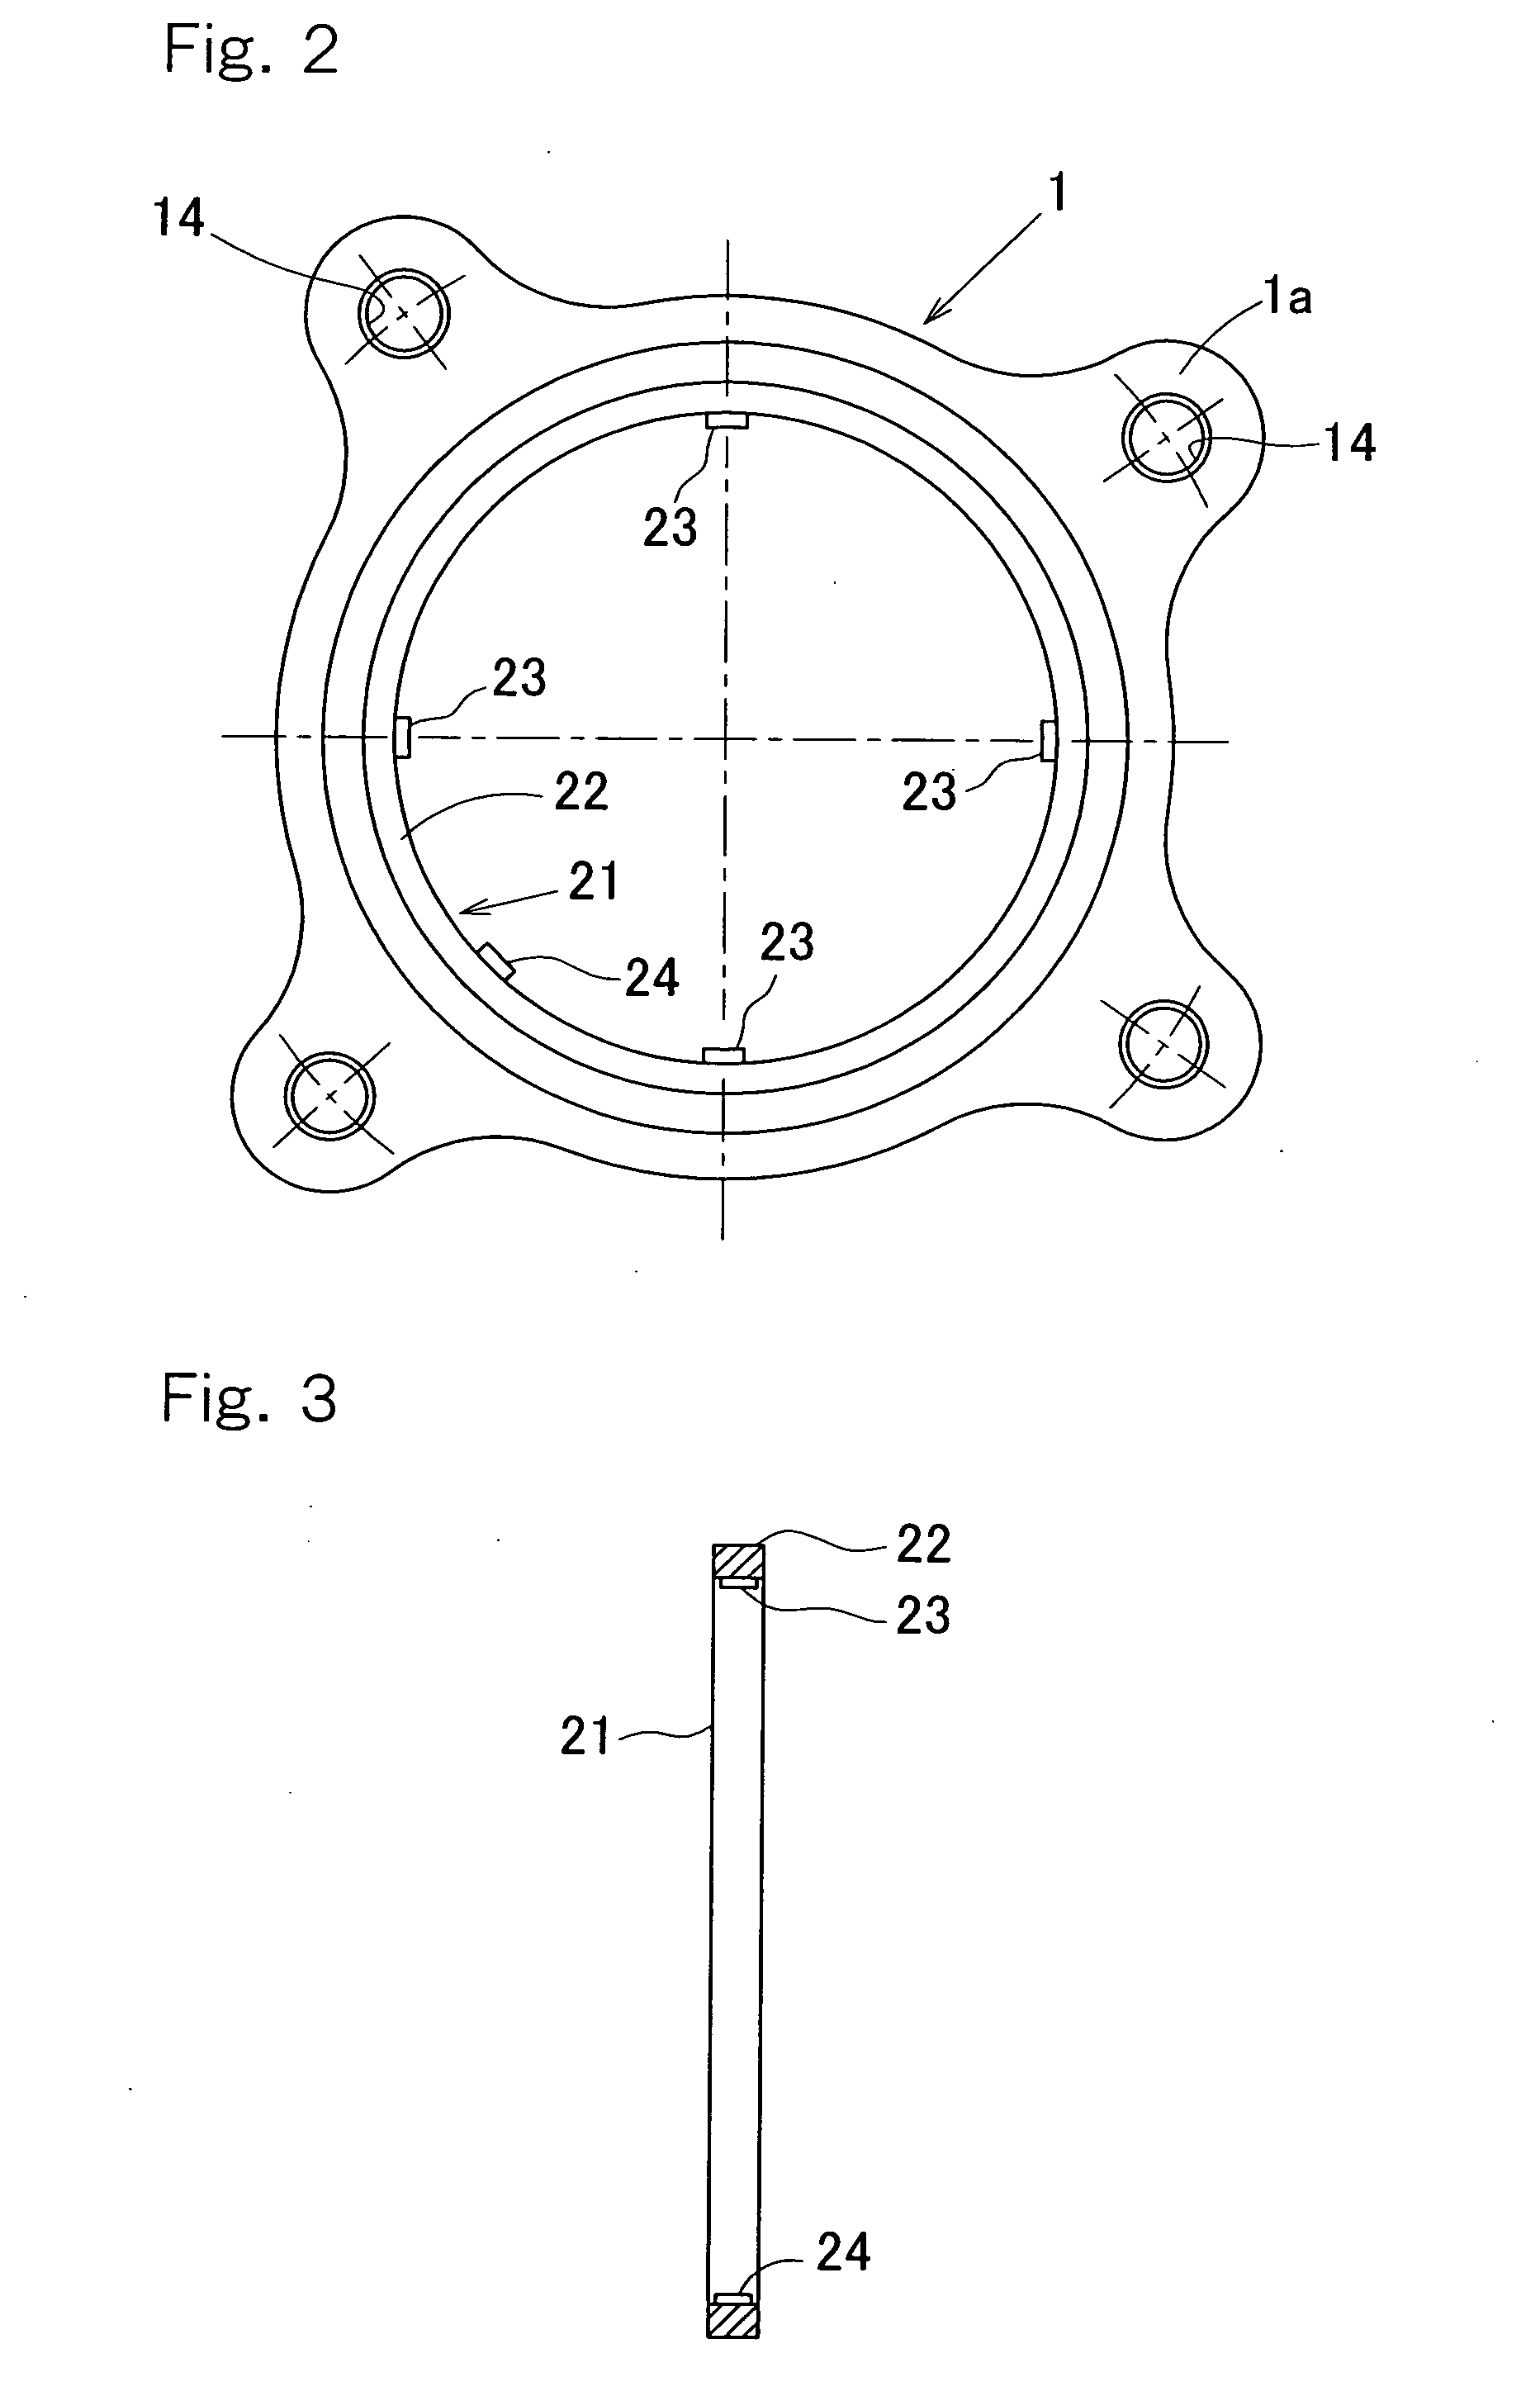 Sensor-Equipped Wheel Support Bearing Assembly